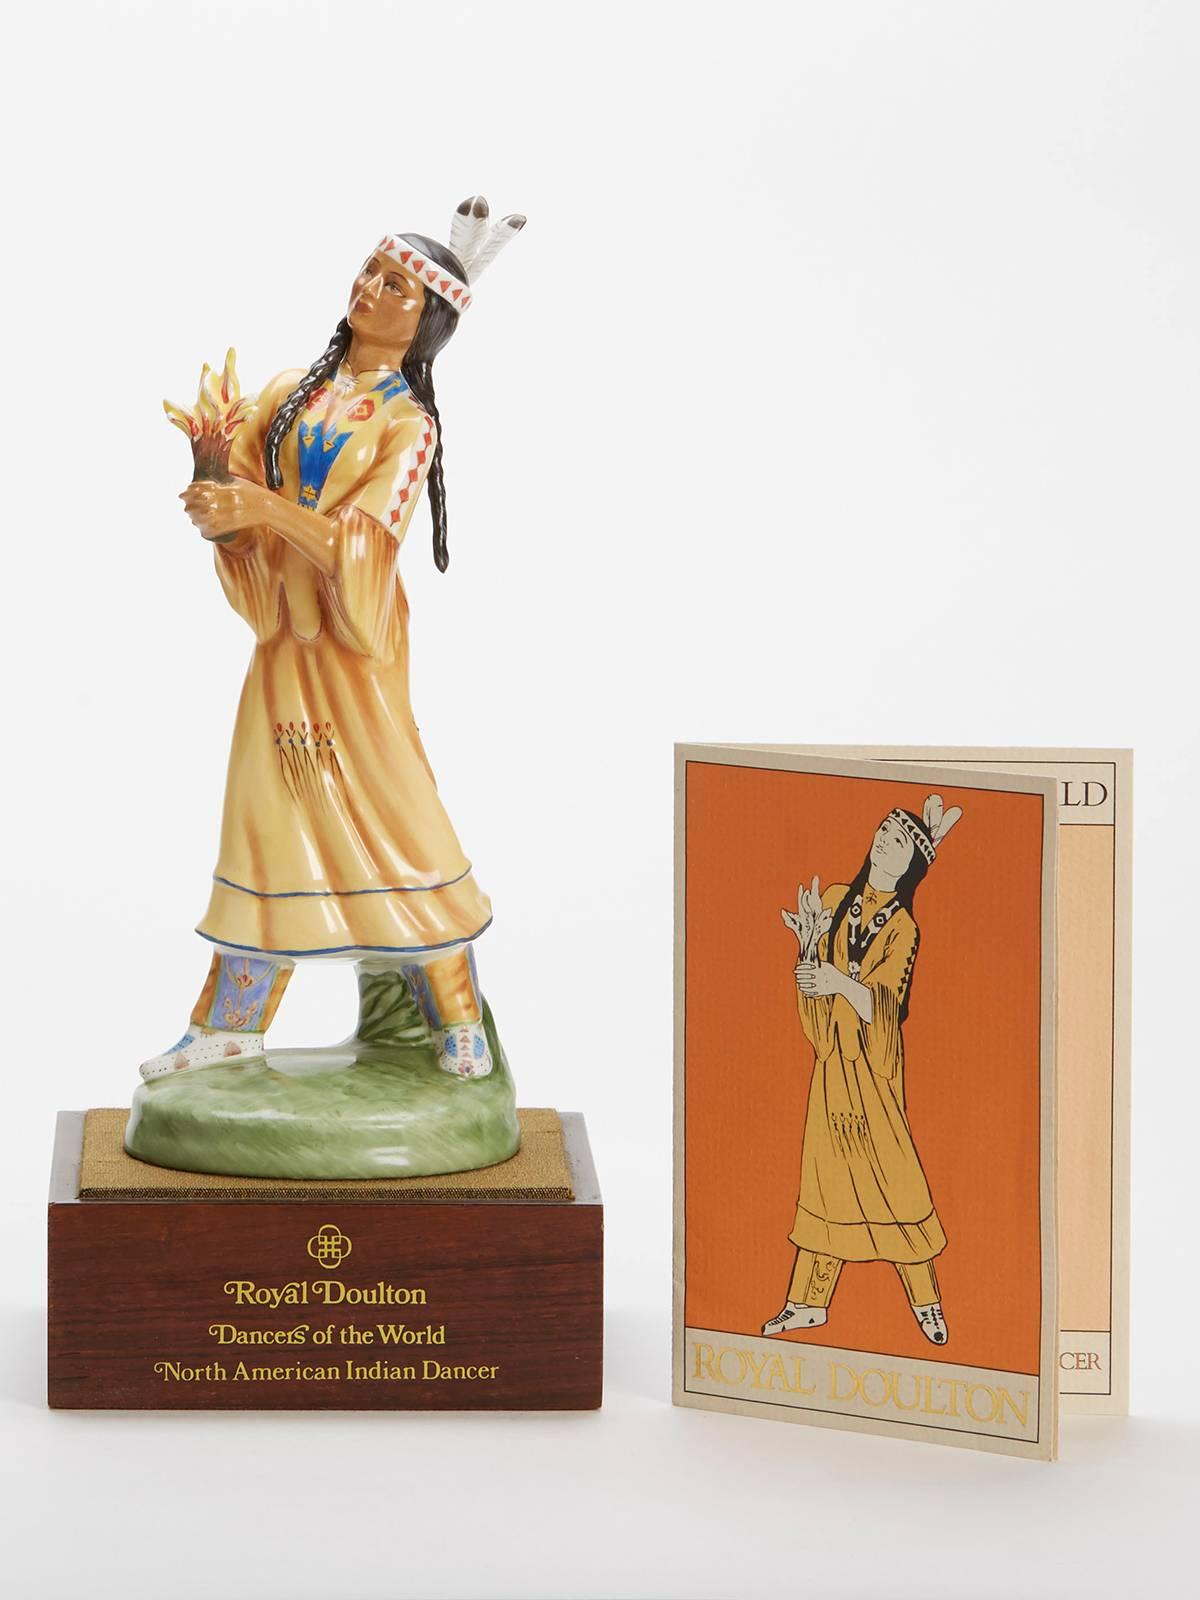 Originating from a private collection a vintage limited edition Royal Doulton dancers of the World Series porcelain figurine titled North American Indian dancer and numbered HN2809. Designed by Peggy Davies the figure is one of 12 figures produced